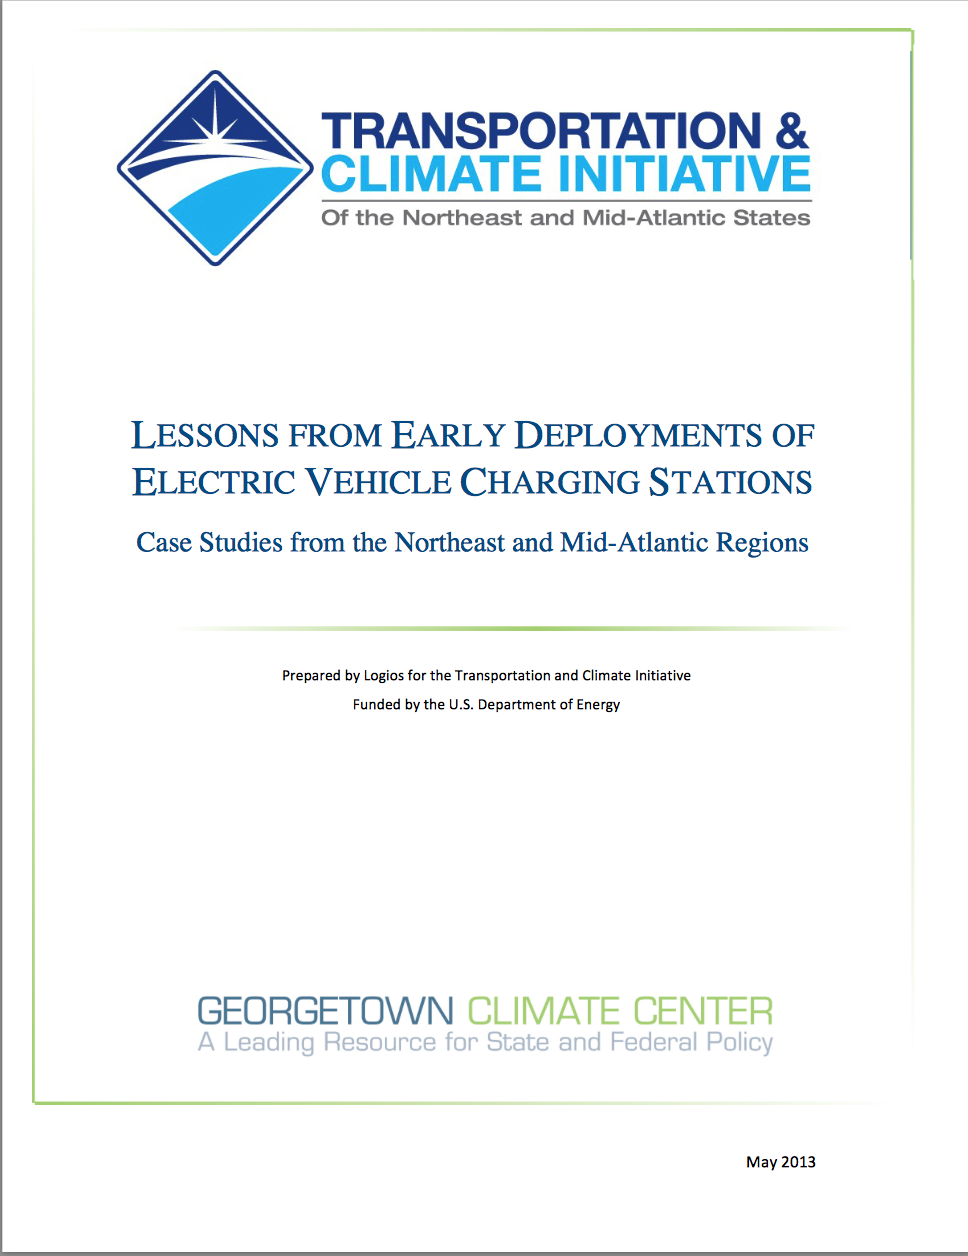 Lessons from Early Deployments of Electric Vehicle Charging Stations